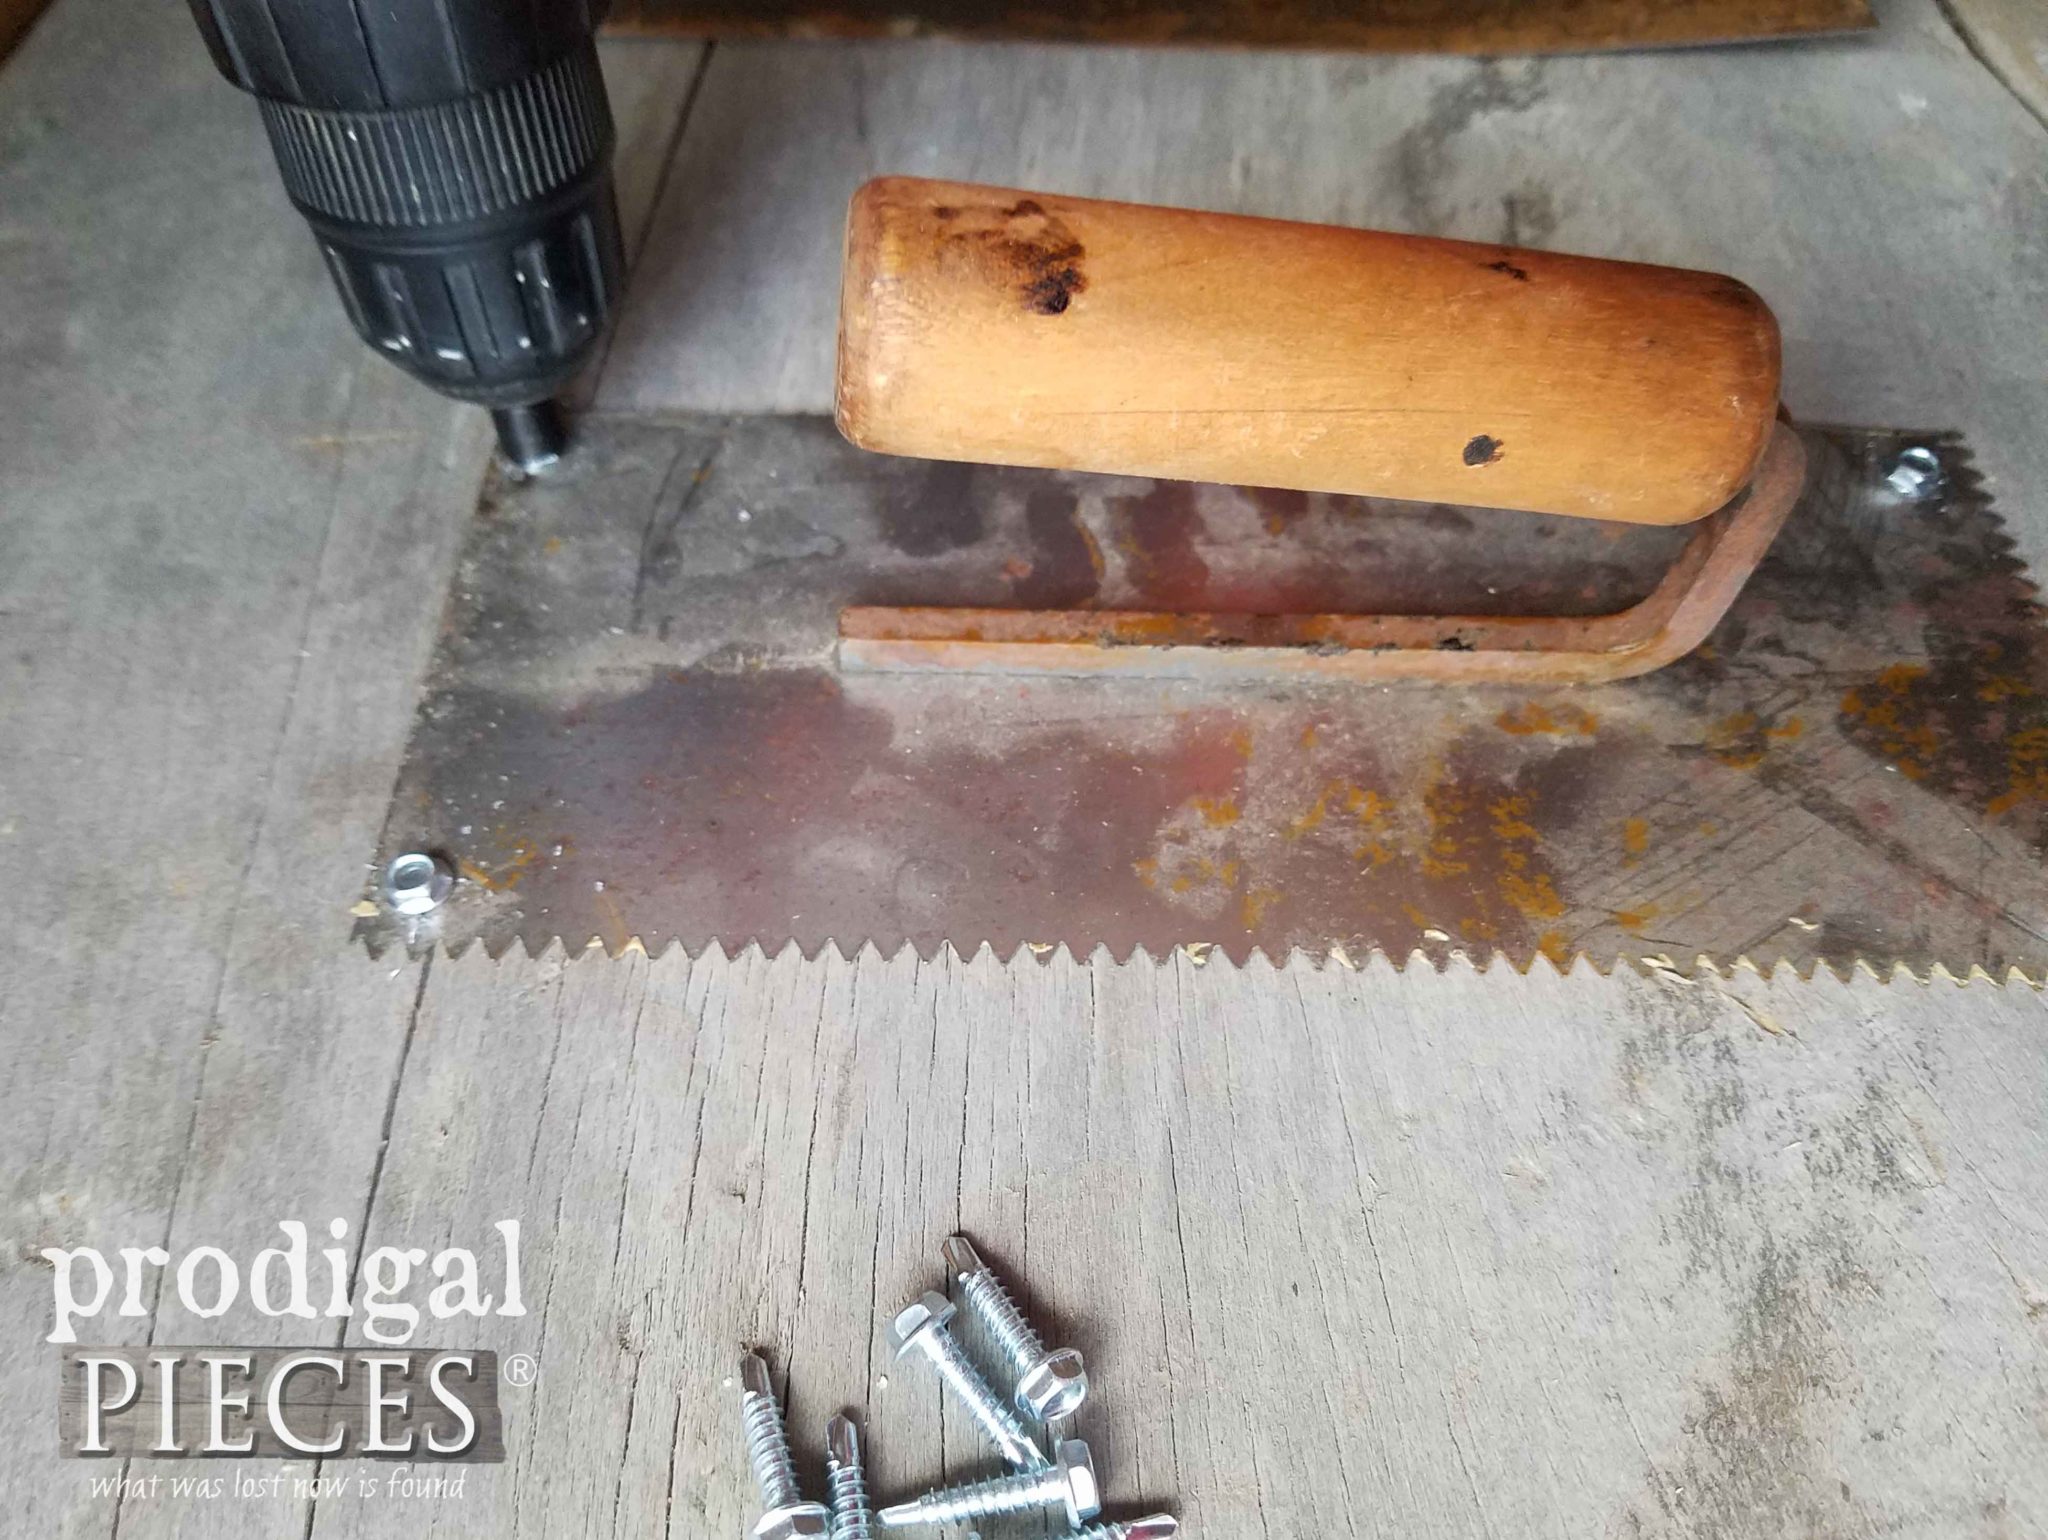 Attaching trowels to barn wood for Flea Market Decor | prodigalpieces.com